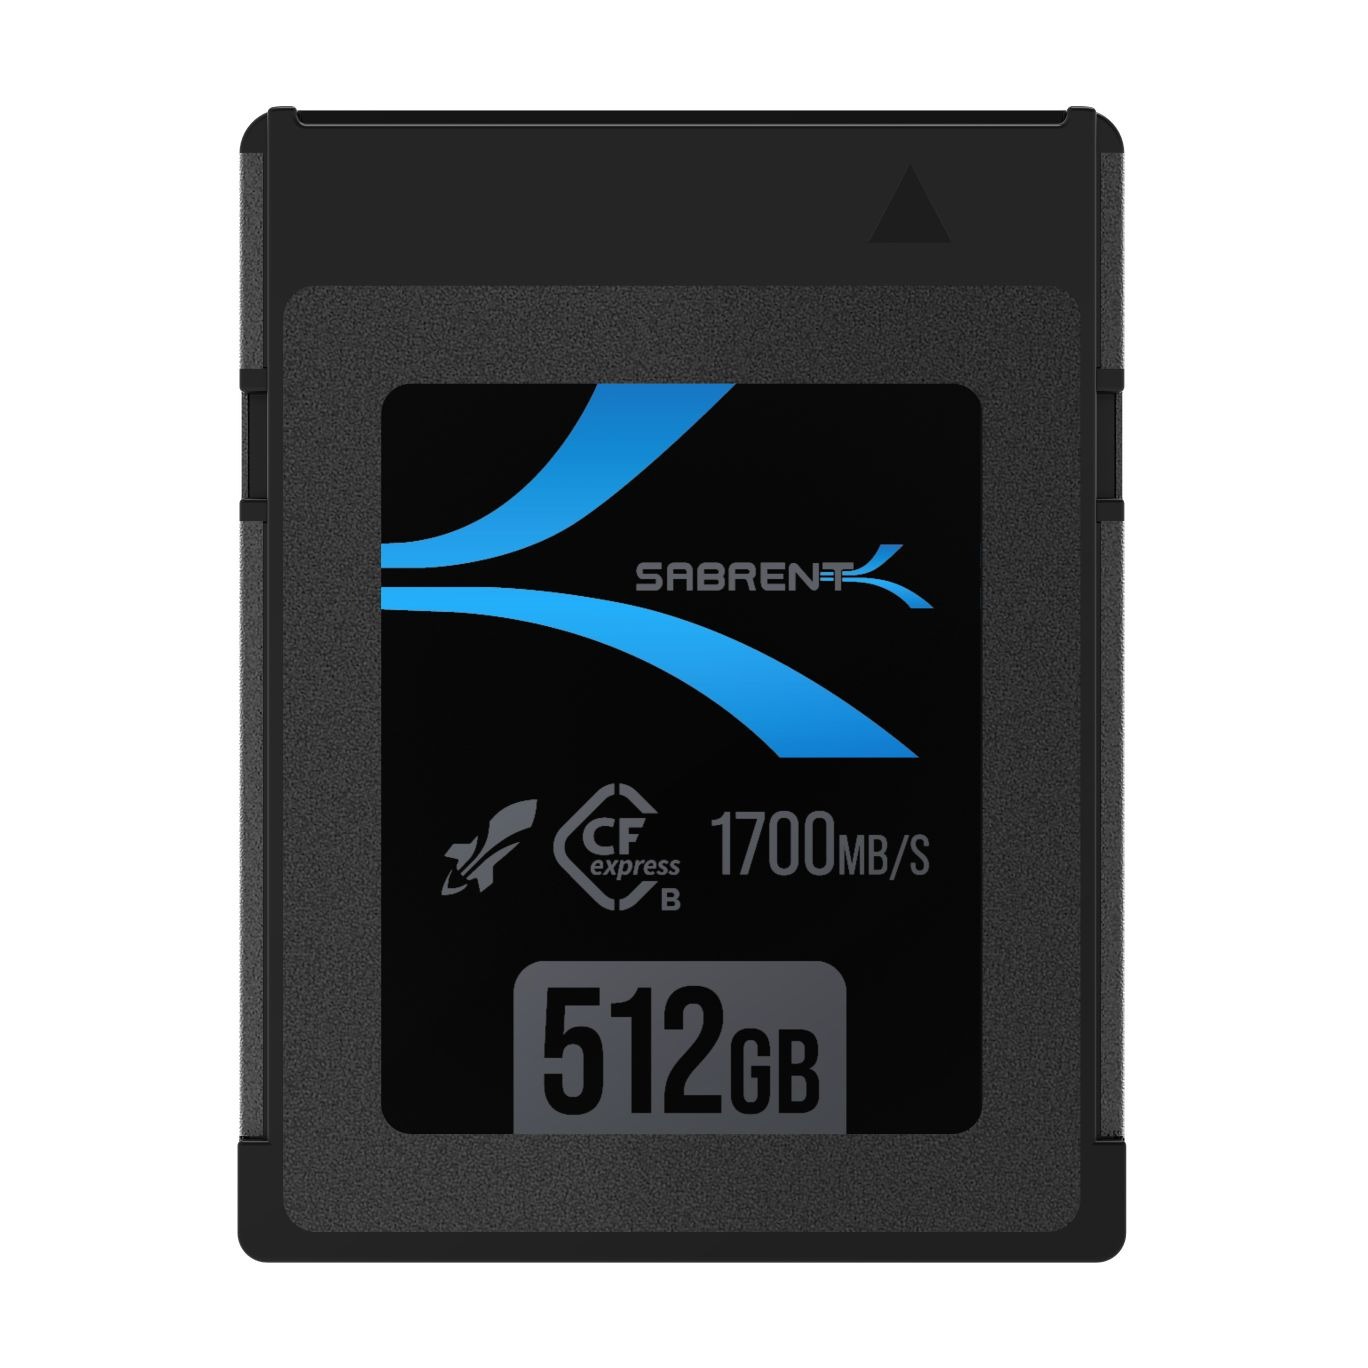 512gb Rocket CFX CFexpress Type B Memory Card for $134.99 after 10% Discount Code